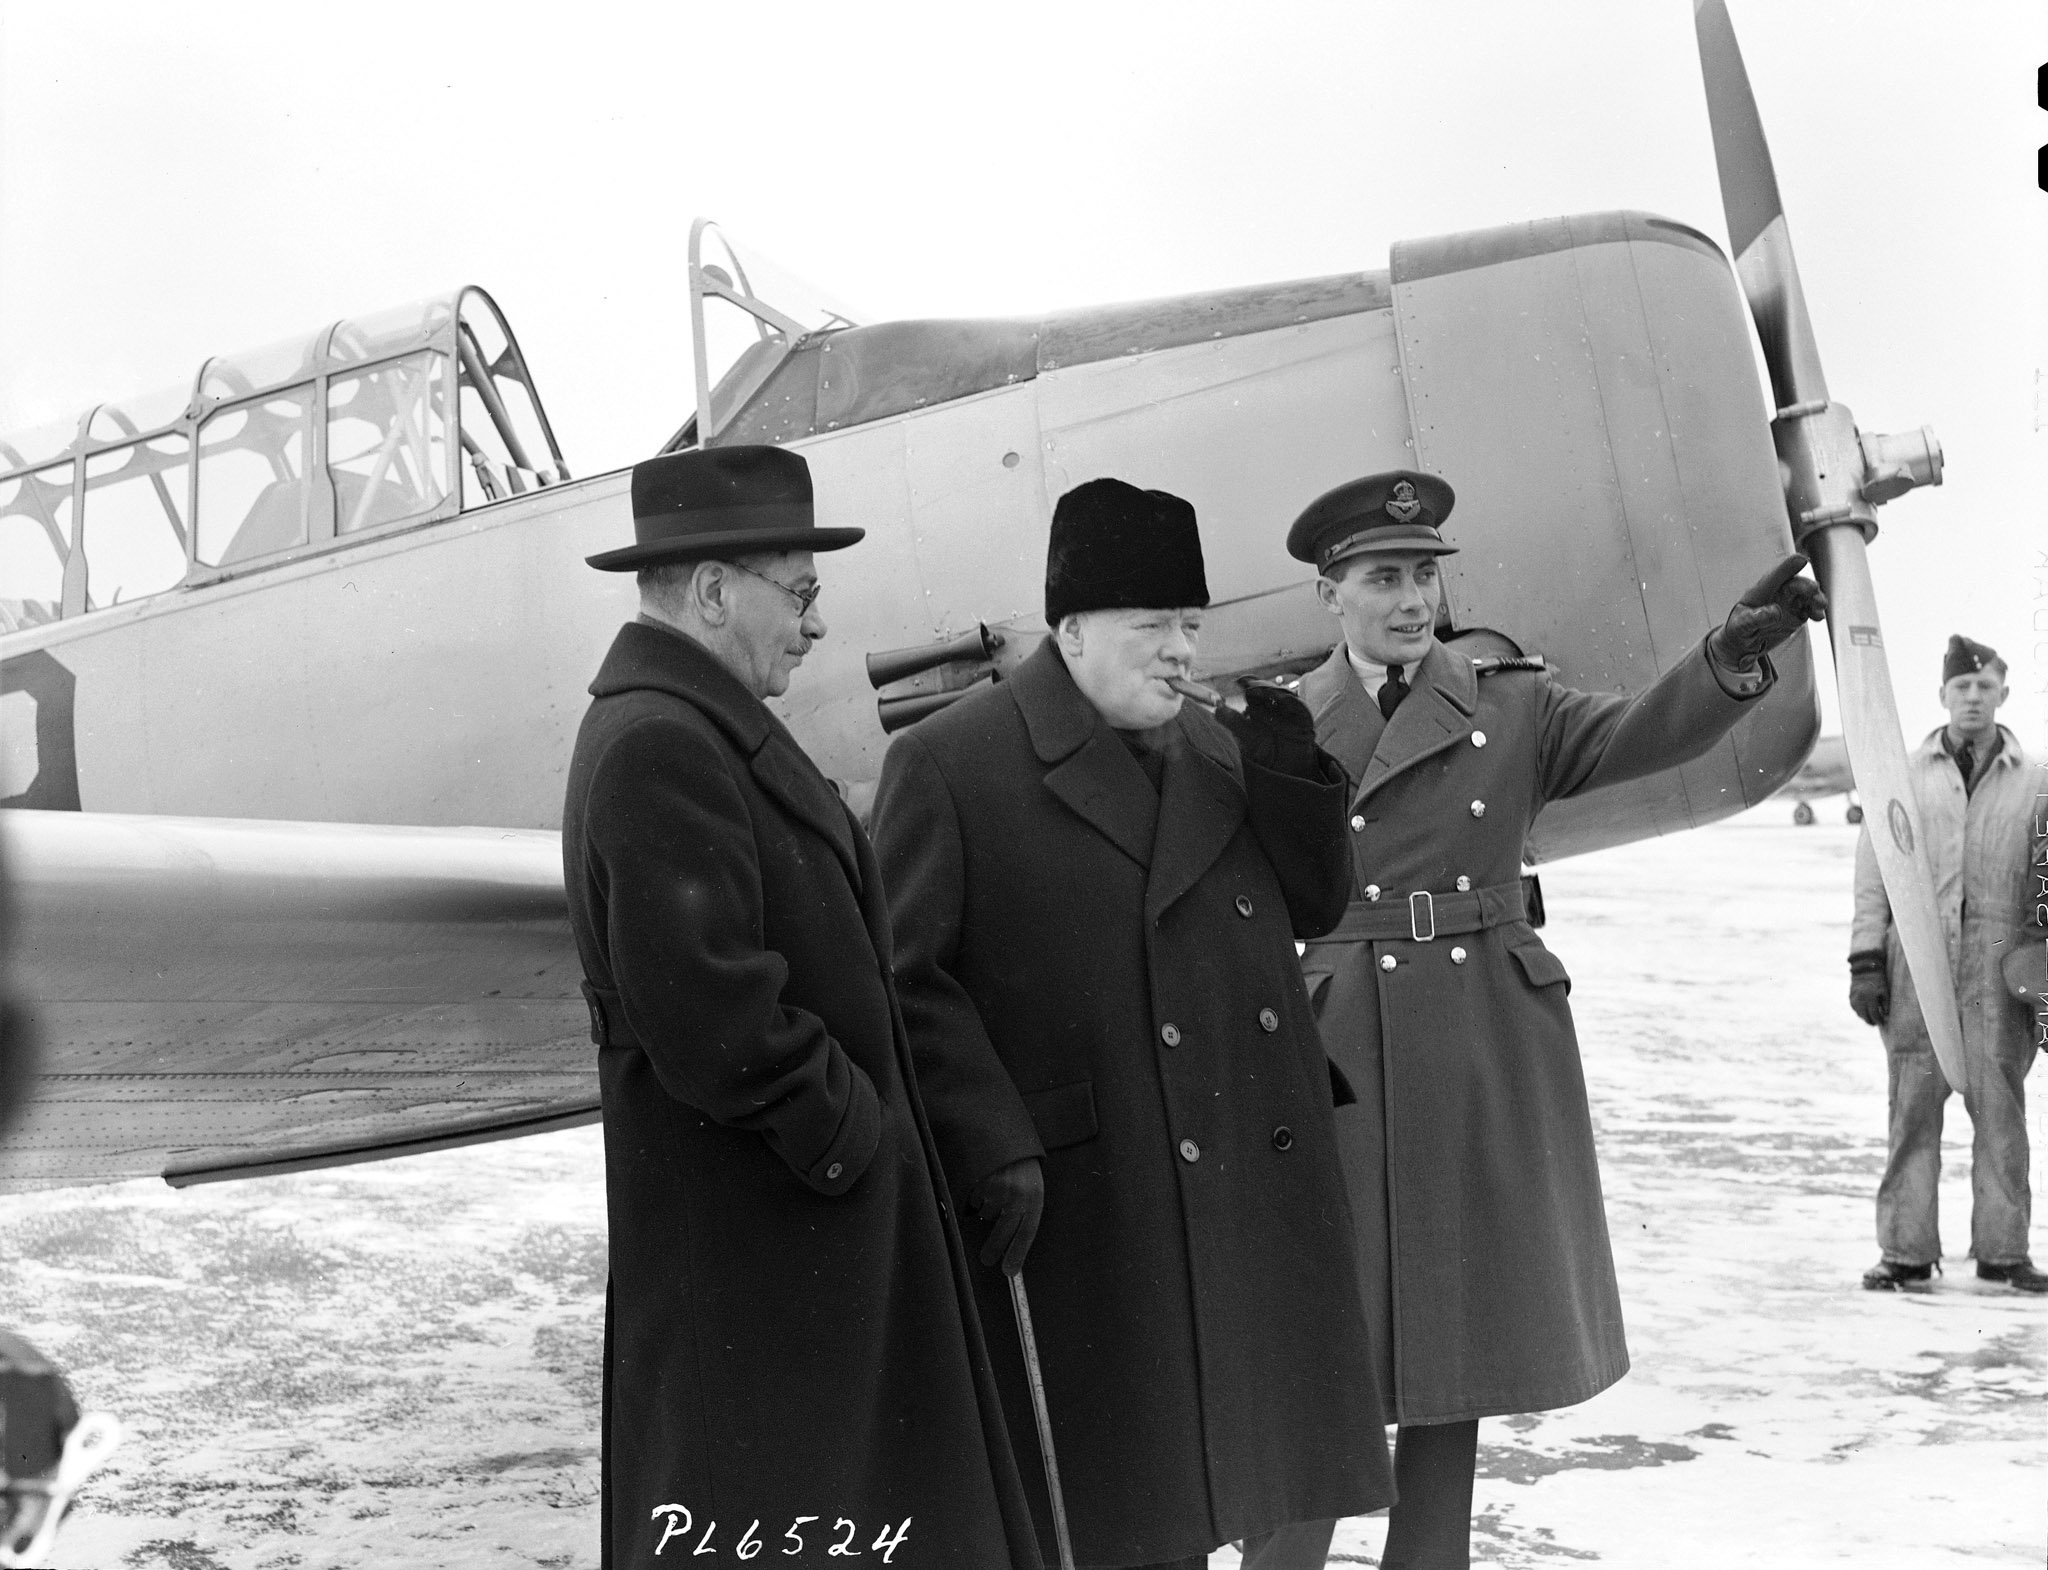 British Prime Minister Winston Churchill (centre) visits the British Commonwealth Air Training Plan school at RCAF Uplands, Ontario, in December 1941 with Canadian Air Minister C.G. Power (left) and Wing Commander W.R. MacBrien. PHOTO: DND Archives